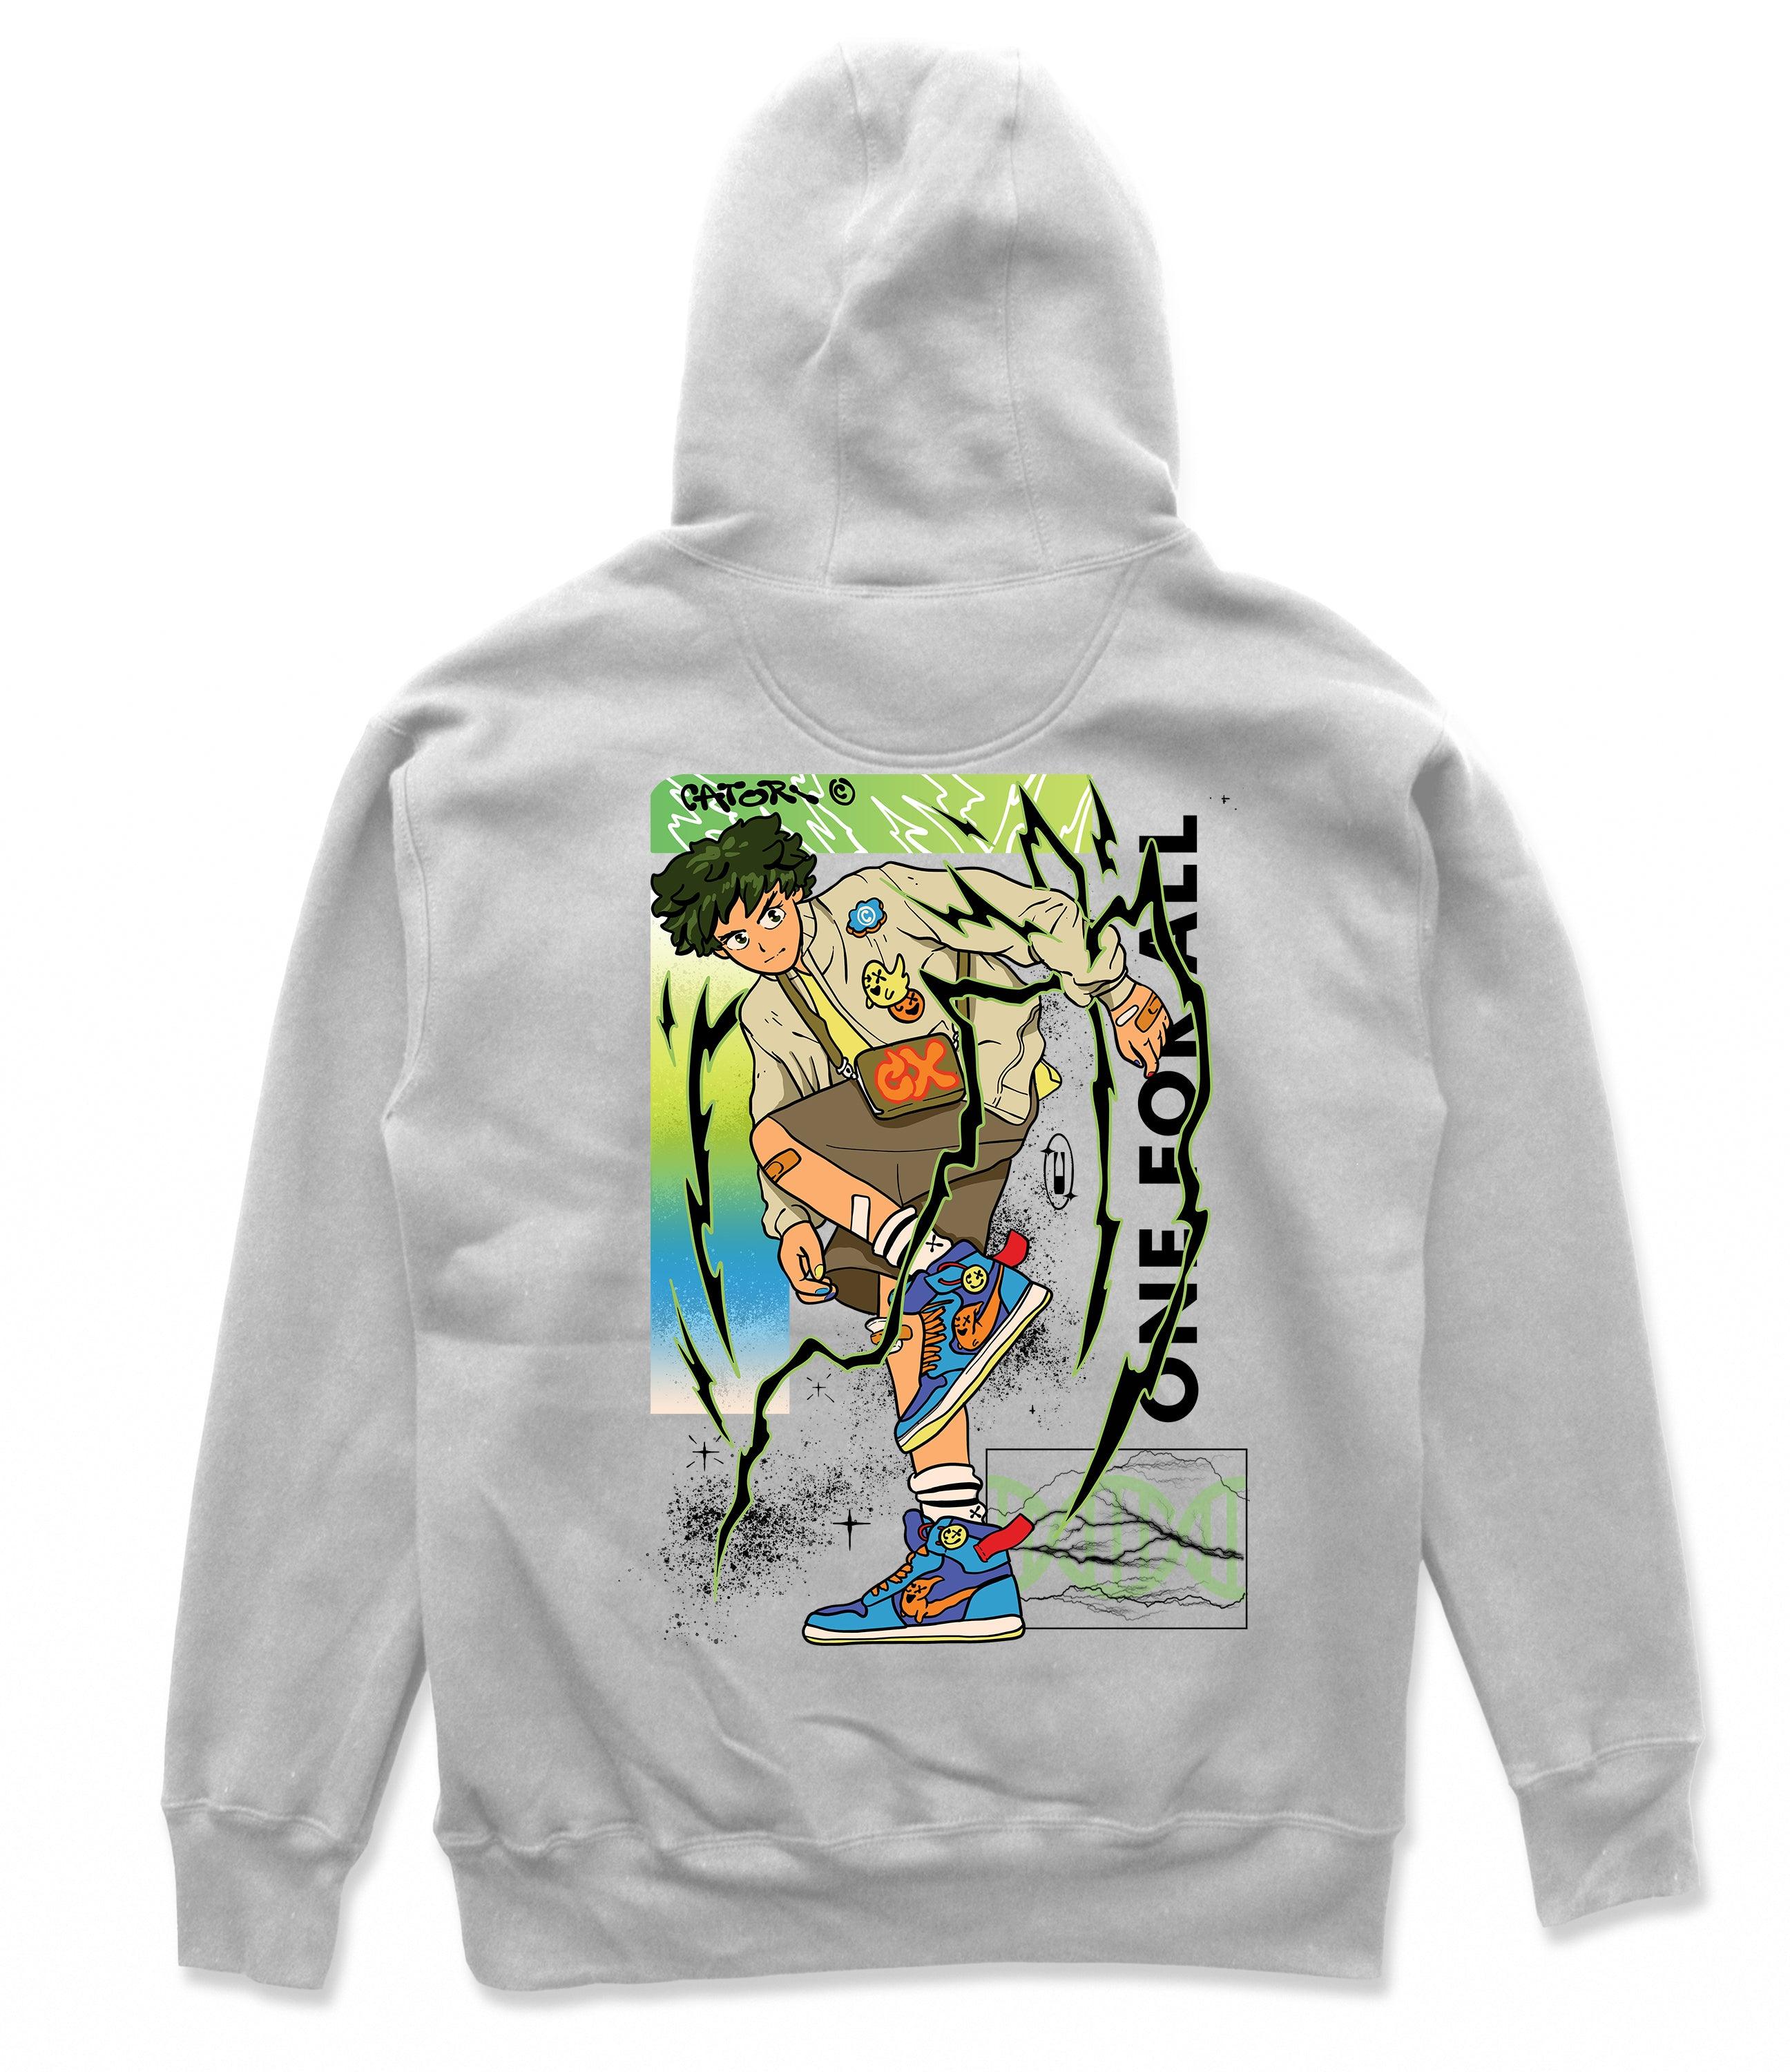 For All Hoodie at Catori Clothing | Graphic & Anime Tees, Hoodies & Sweatshirts 